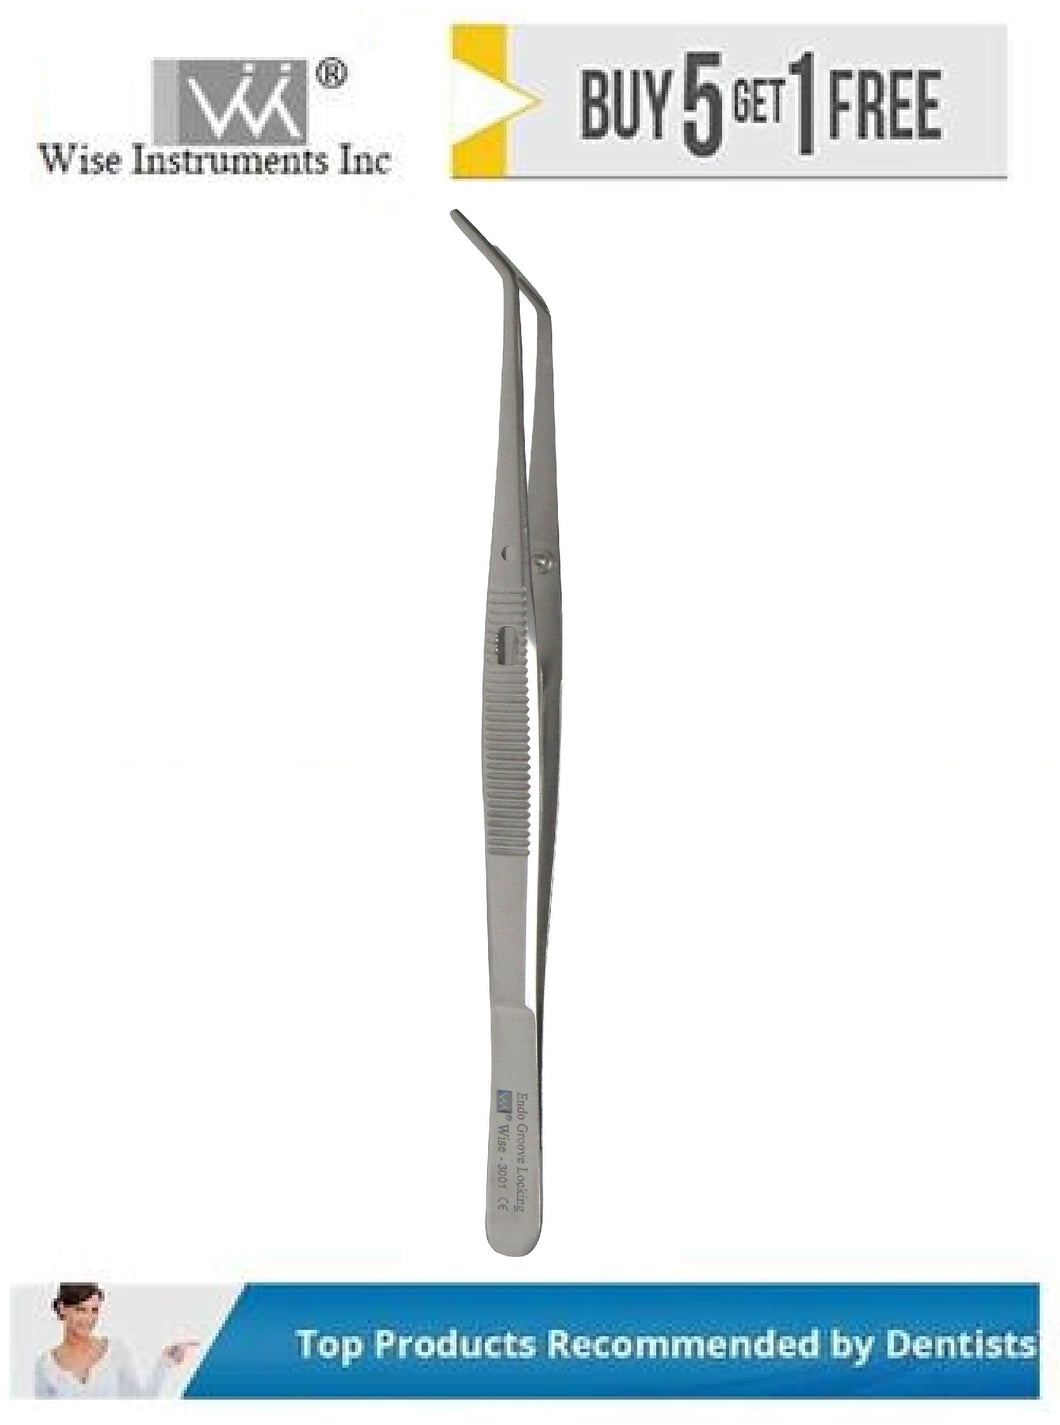 Locking Endodontic Pliers #3 with Grooved Tips, Endo Tweezer